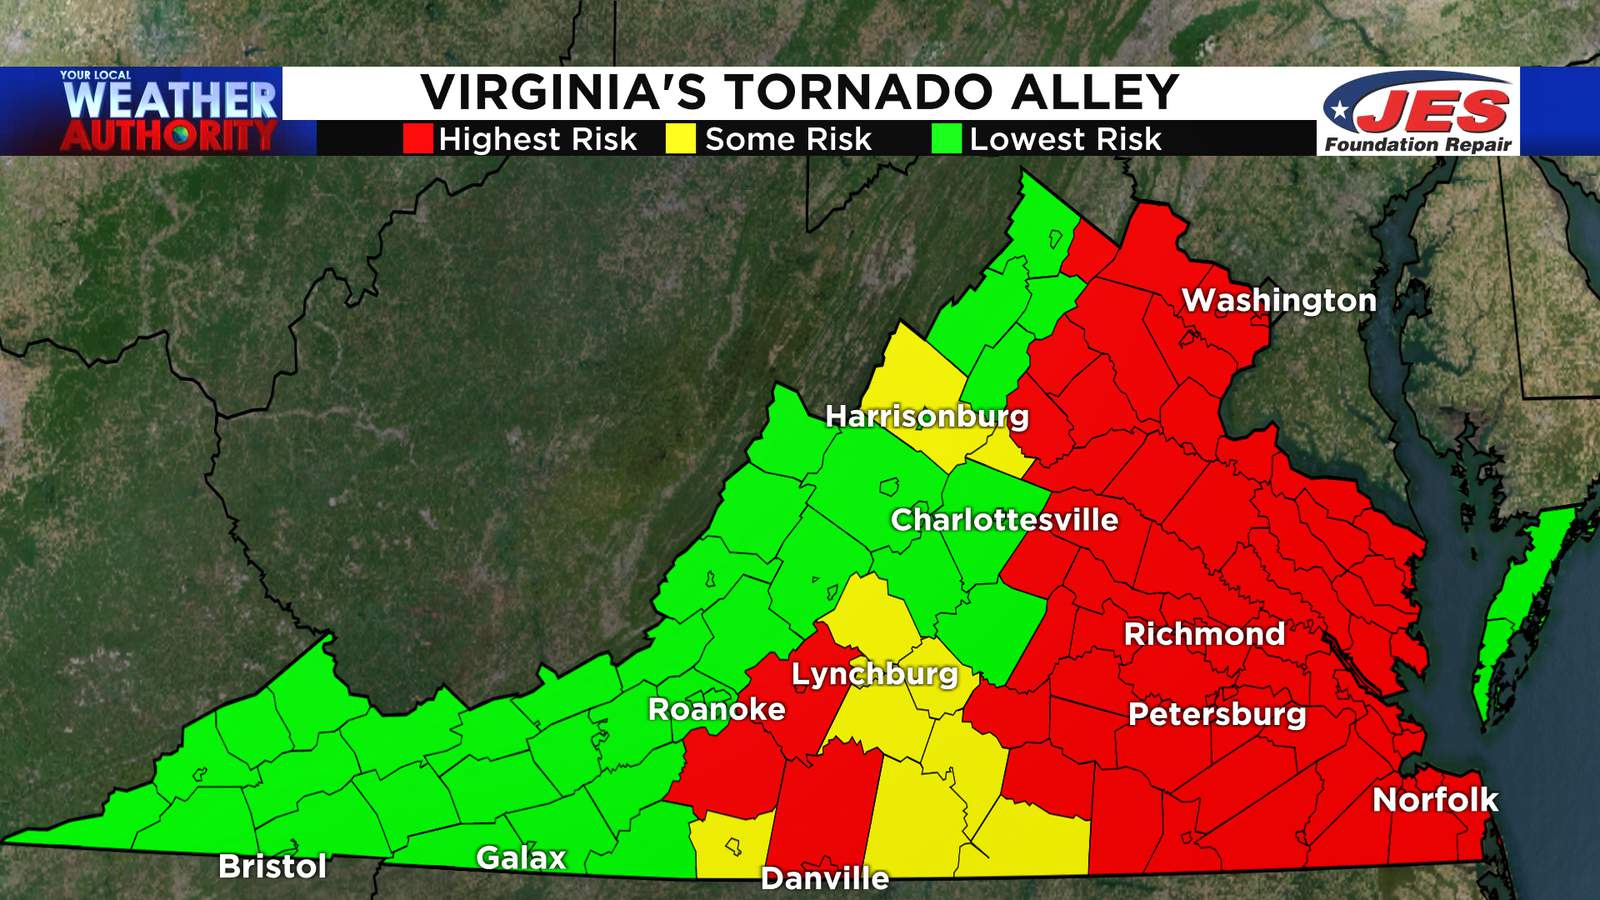 New study finds certain parts of Virginia are more susceptible to tornadoes than others